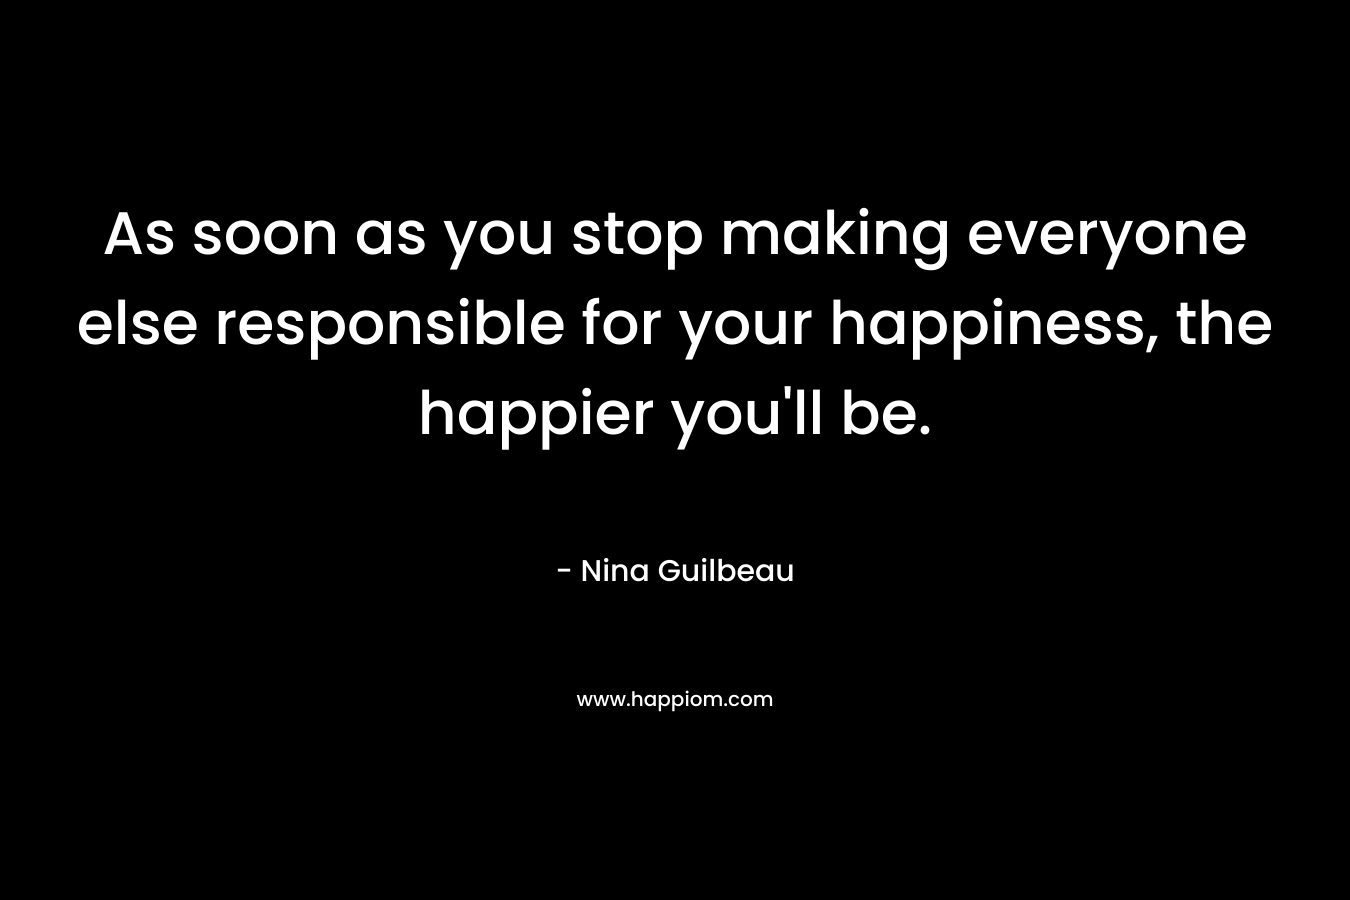 As soon as you stop making everyone else responsible for your happiness, the happier you'll be.